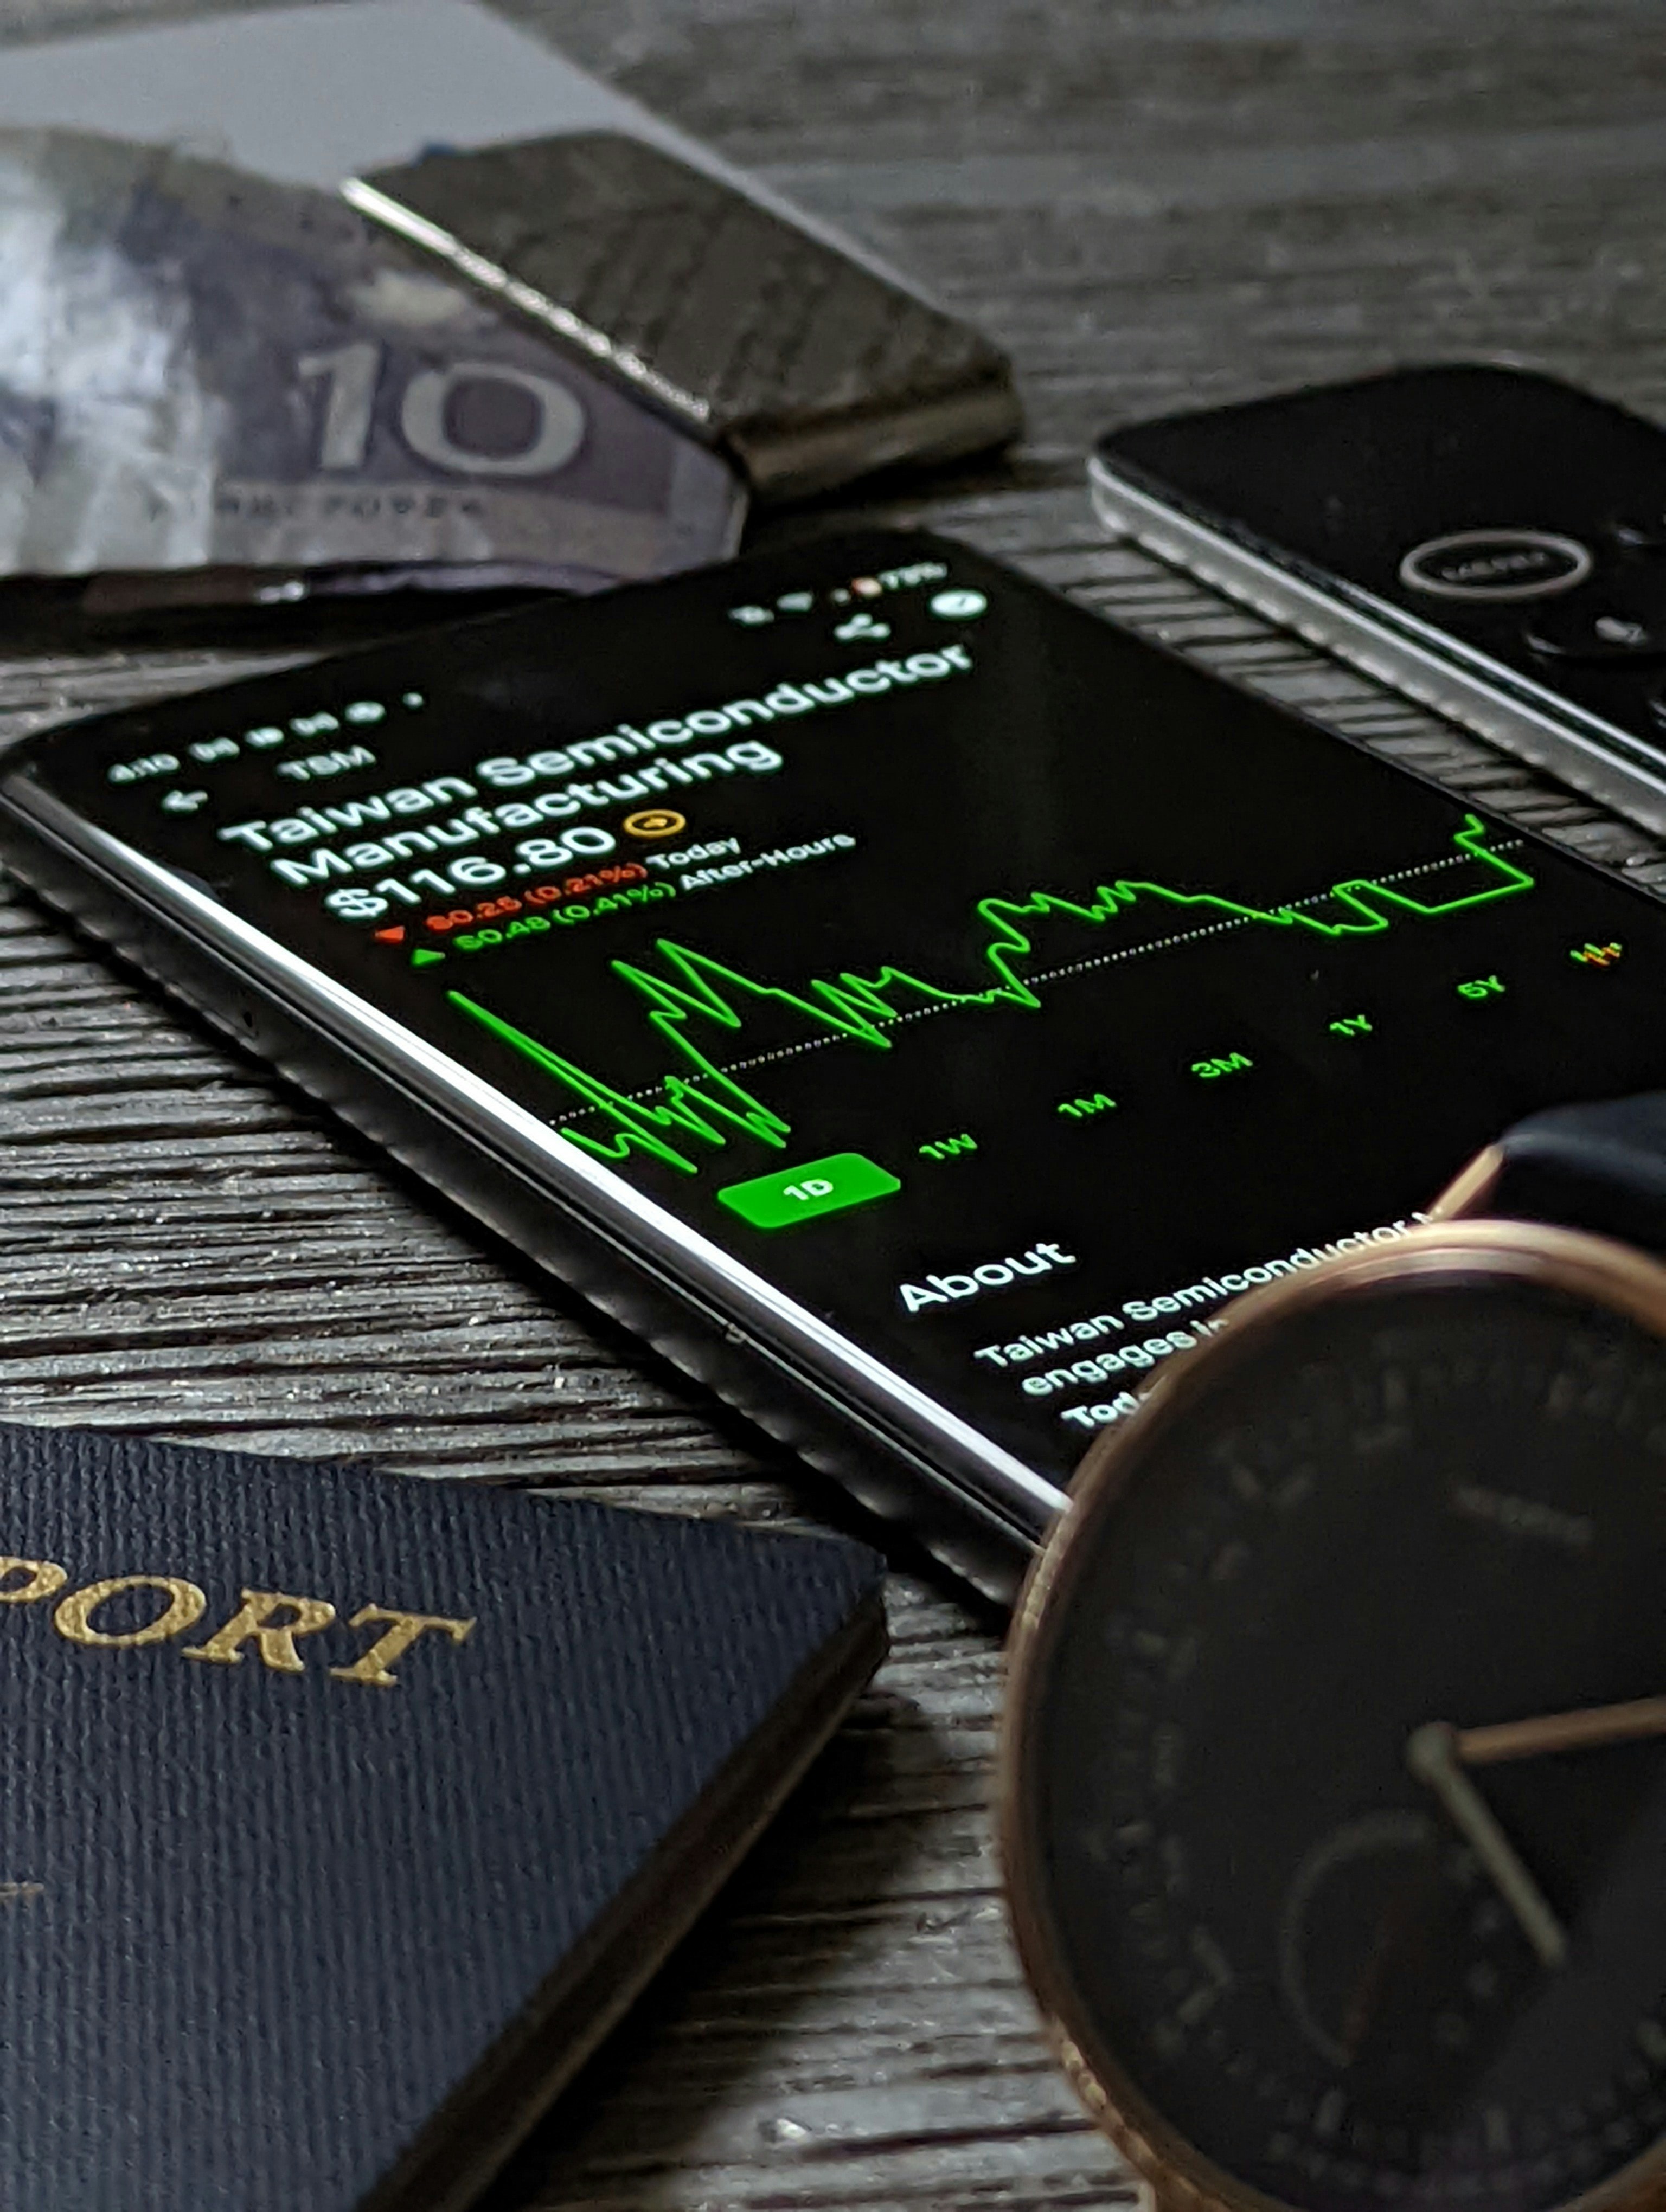 Blockchain Trading Application Displays Information for Taiwan Semiconductor, American Passport, Misfit Watch, Apple TV Remote, and Money Clip with Canadian Money.